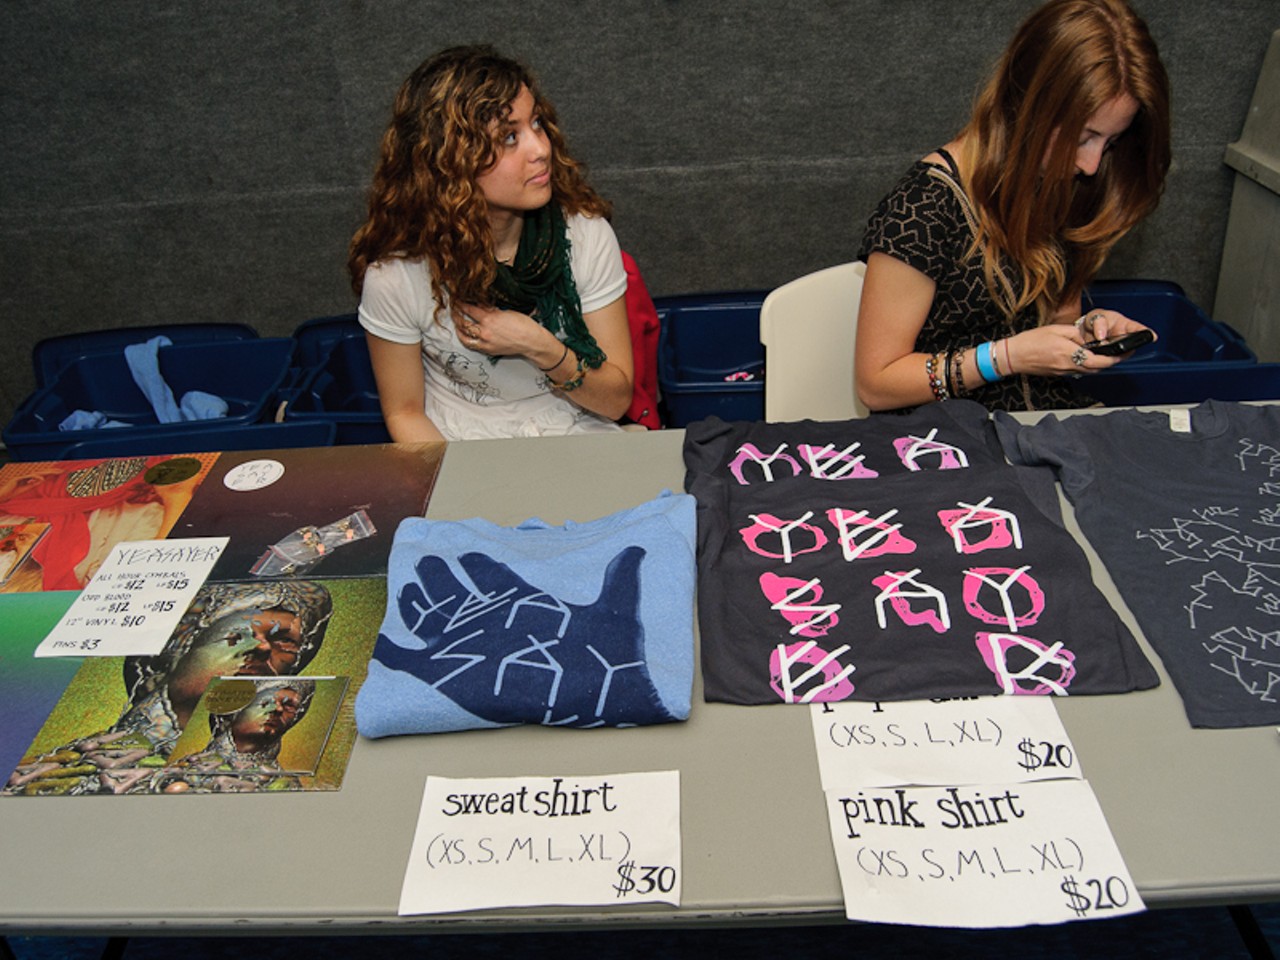 Yeasayer merchandise - shirts, posters and records.